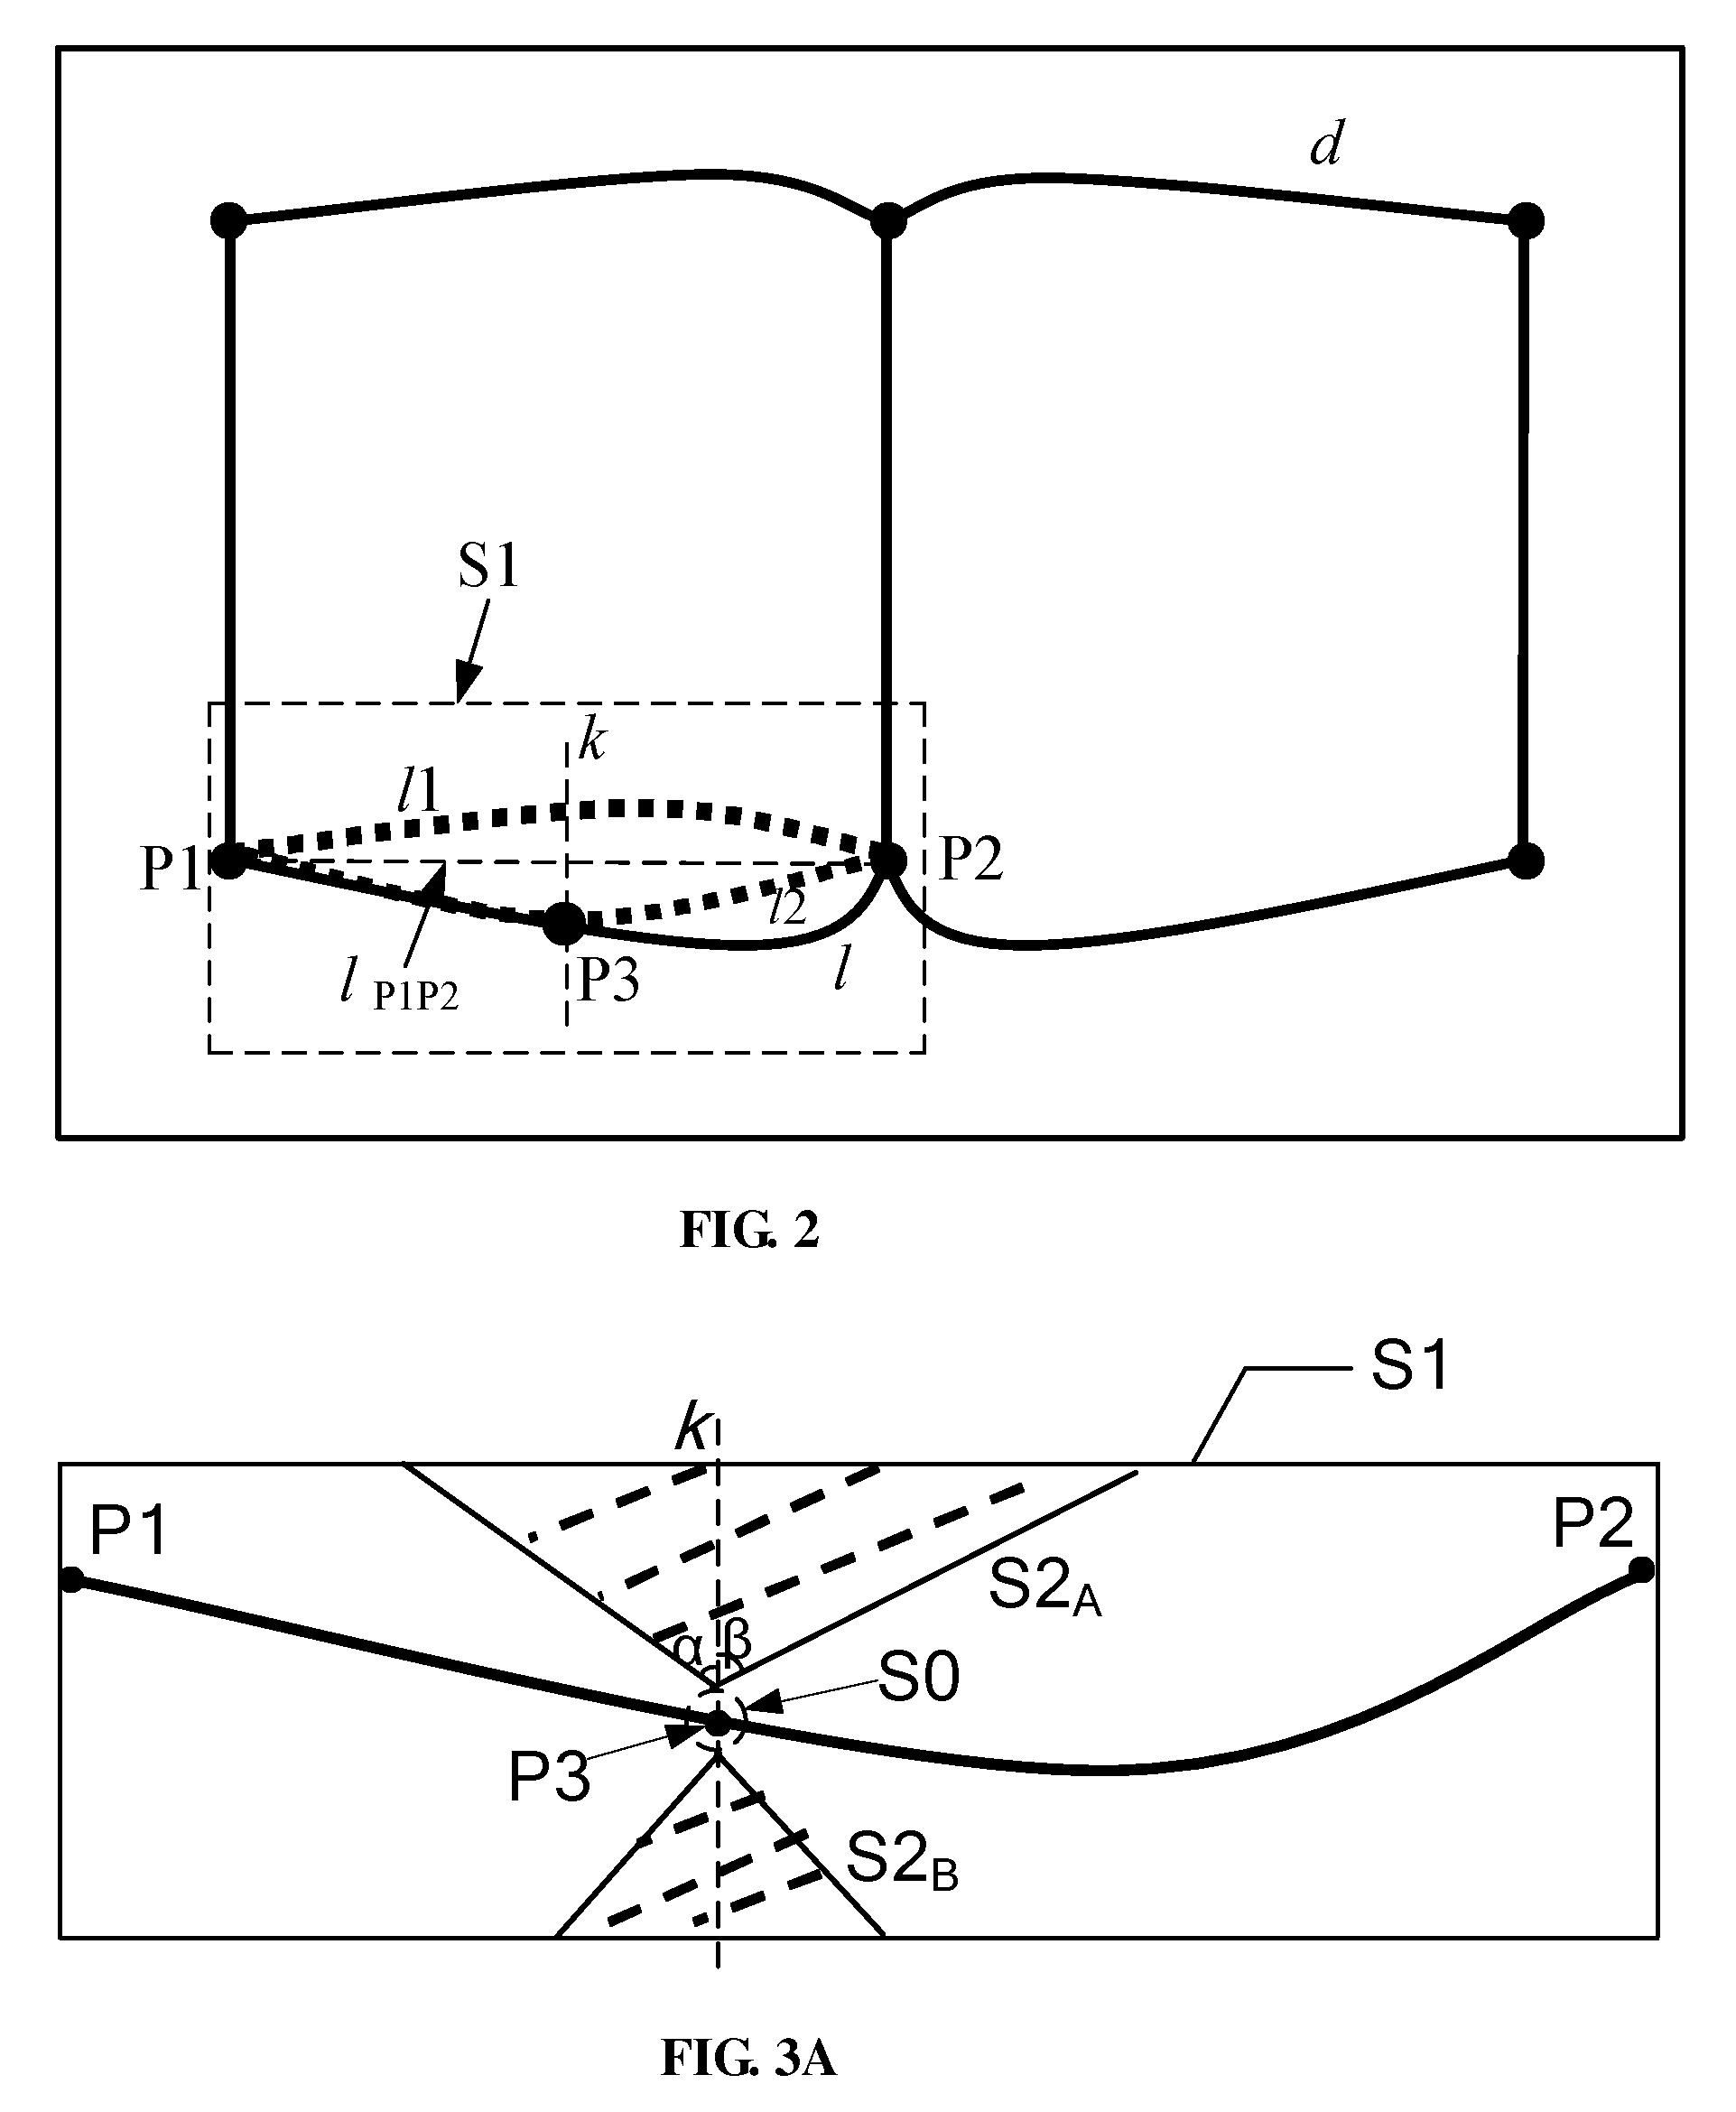 Apparatus, method for extracting boundary of object in image, and electronic device thereof